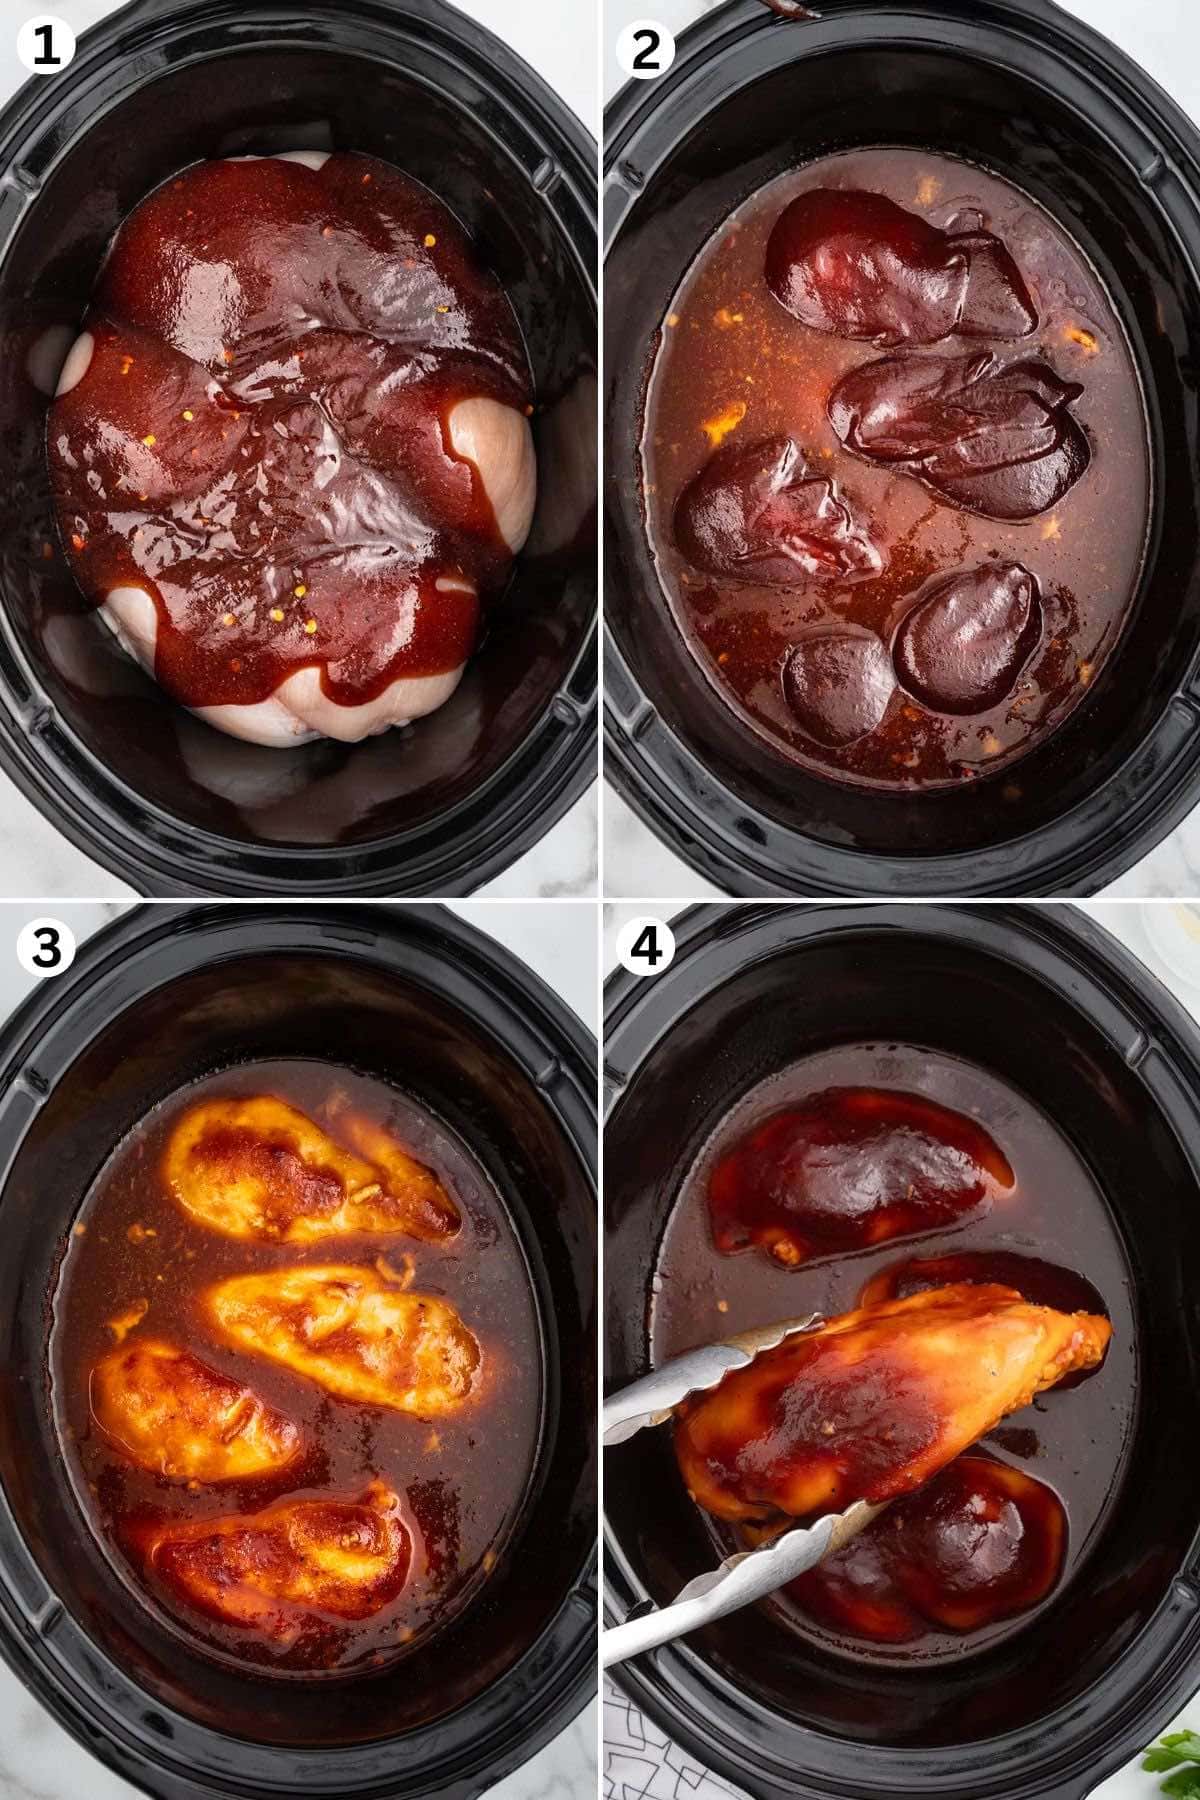 Place the chicken pieces in a single layer in the slow cooker insert and pour the sauce. Cook. Remove the lid and add the remaining Sweet Baby Ray’s barbecue sauce to the chicken. Remove the chicken from the crockpot and place it onto a serving plate.